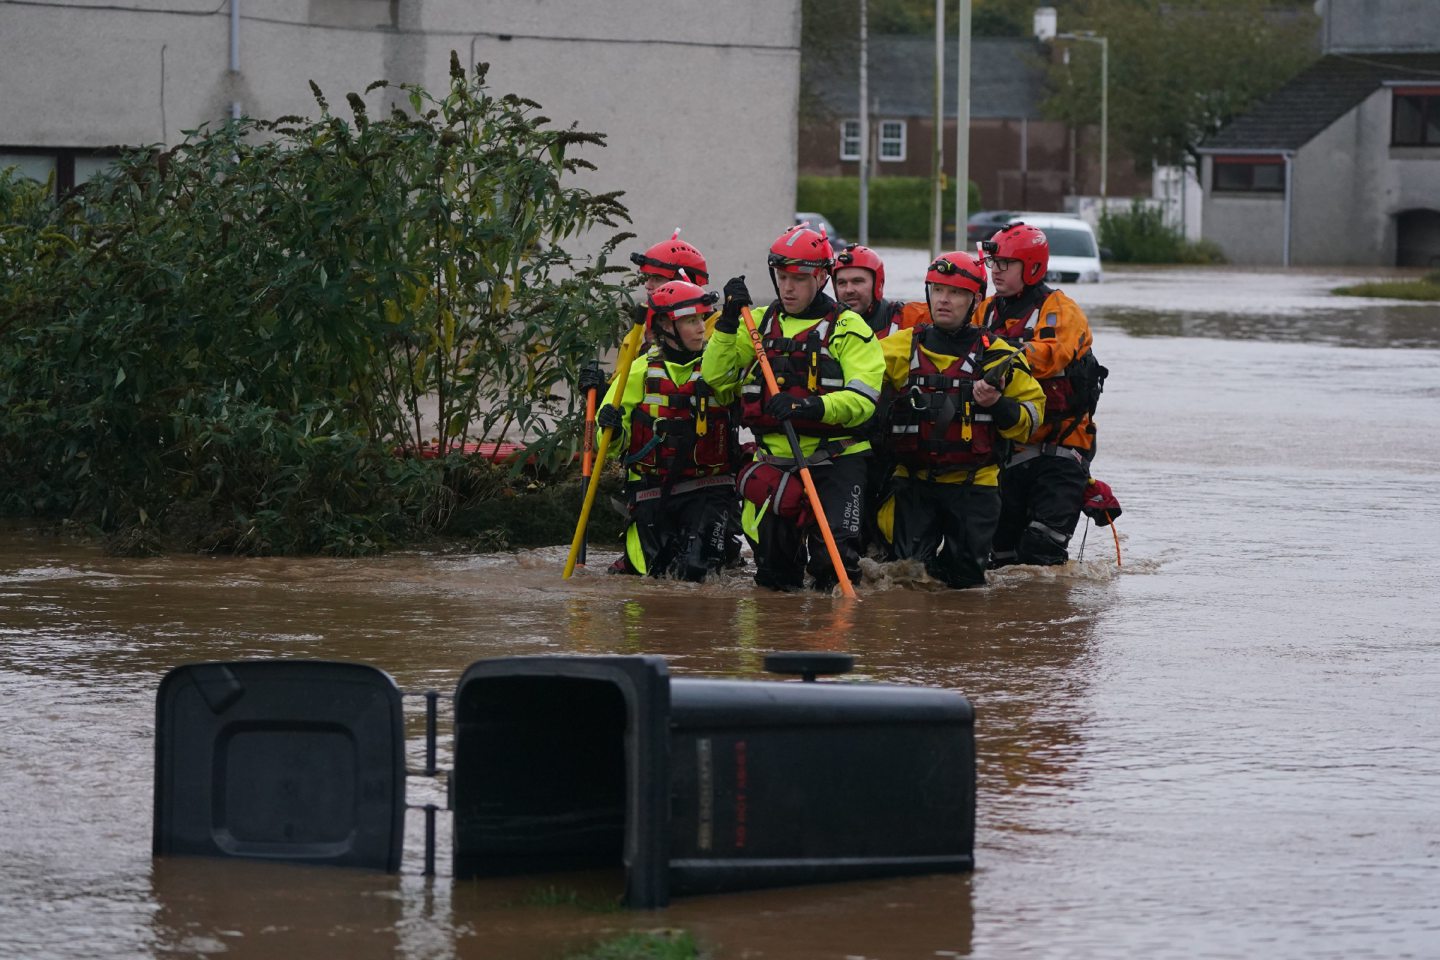 Emergency crews dredge through the water to help residents of Brechin.